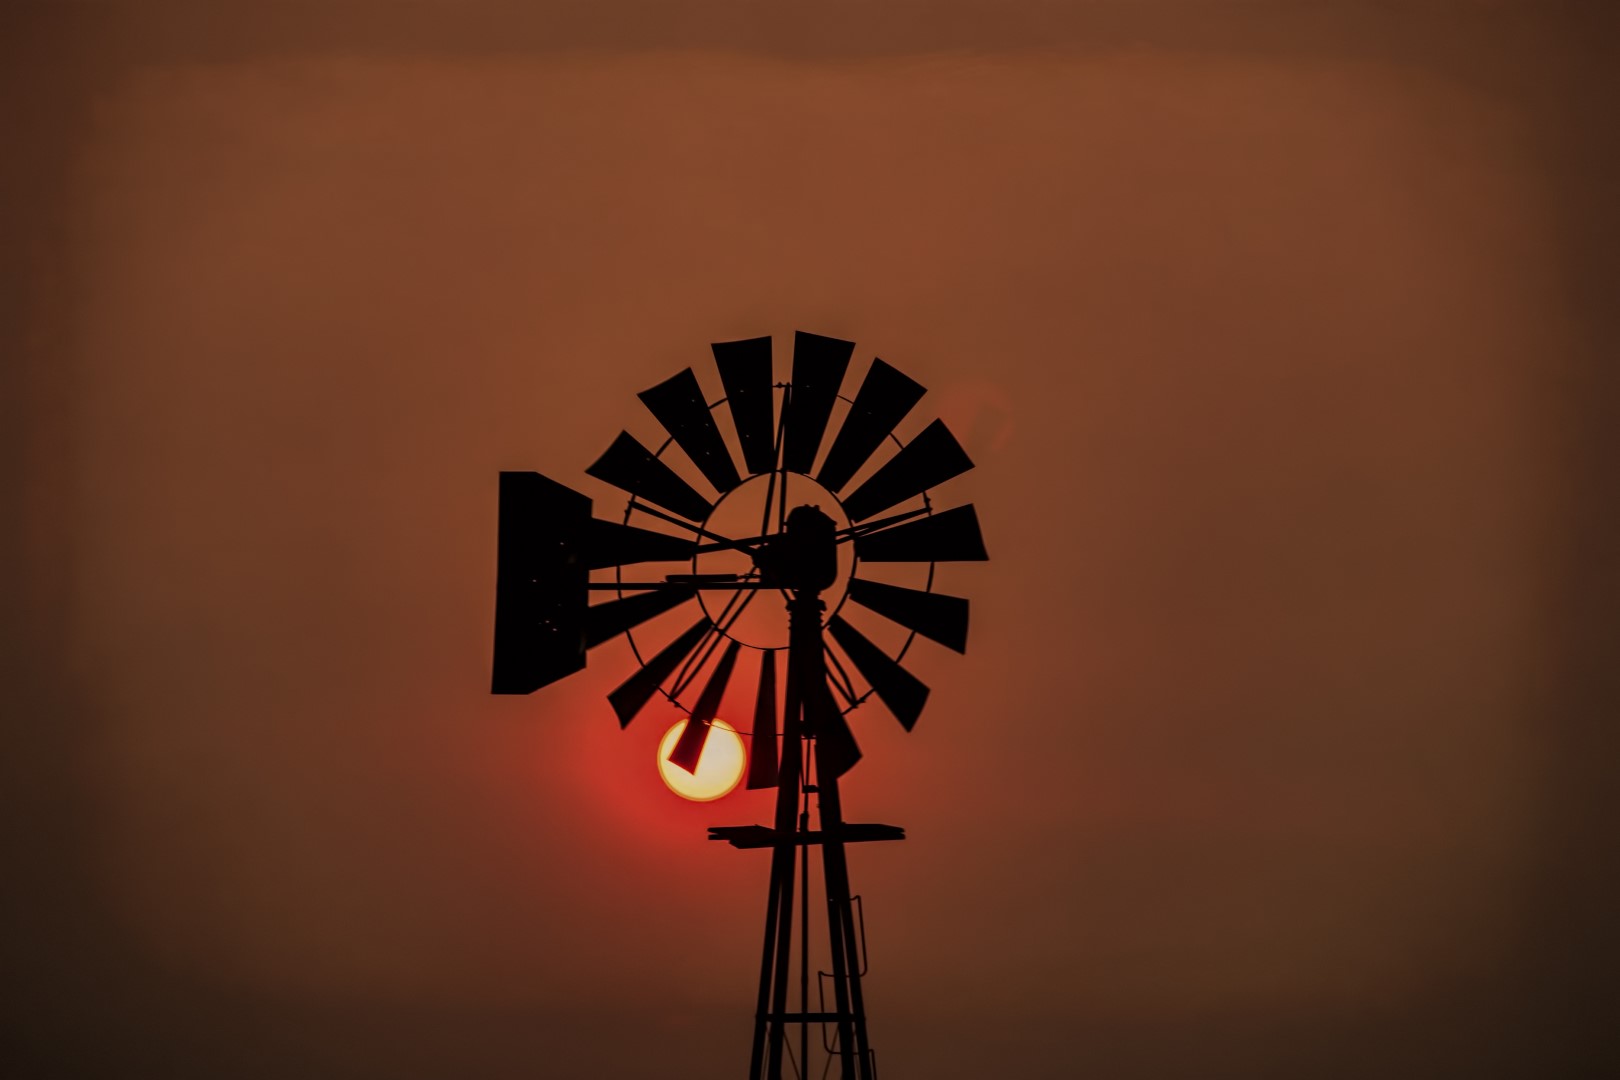 The sun begins to set behind a windmill in Eastern Finney County Kansas